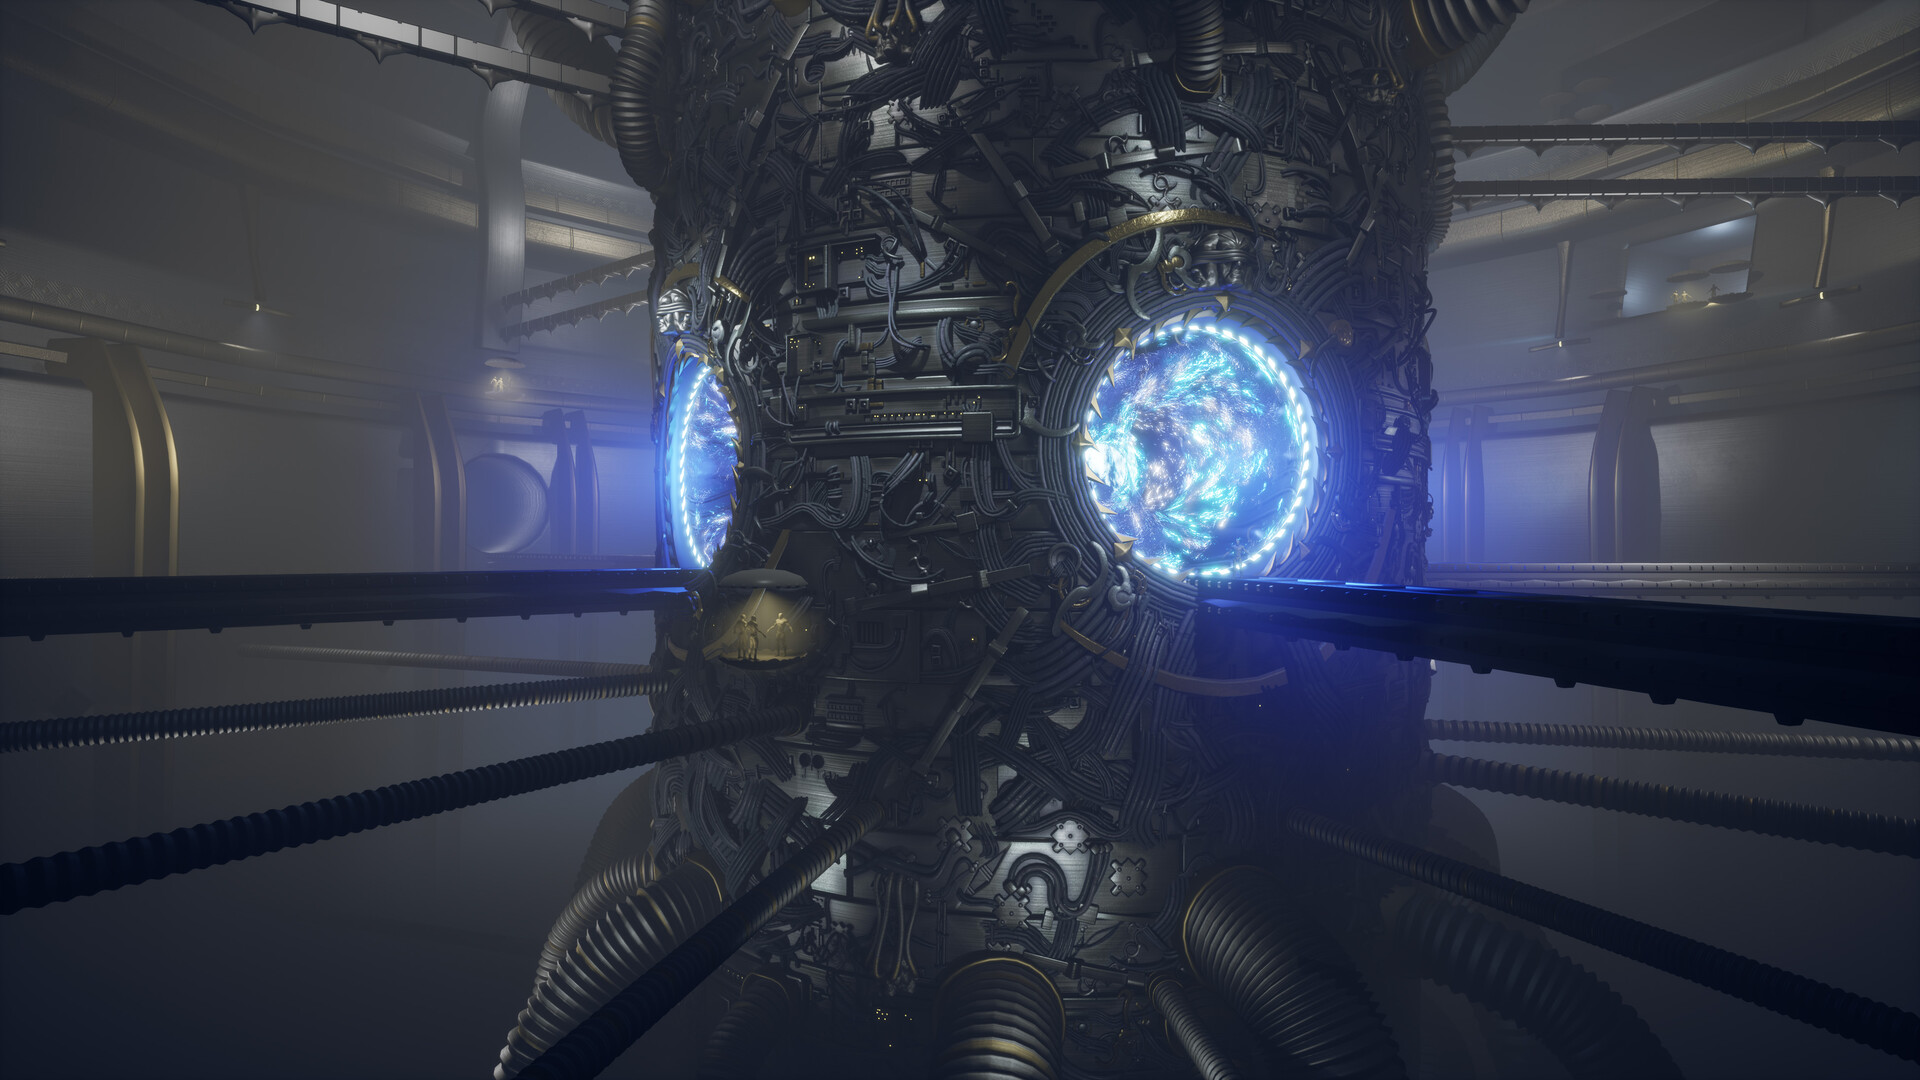 Main camera angle, Unreal 4. Shown is the large, cylindrical portal structure. The gaps where the portals are, that were blank, emissive cards before, are now replaced for fluid-like VFX shader on a tori.